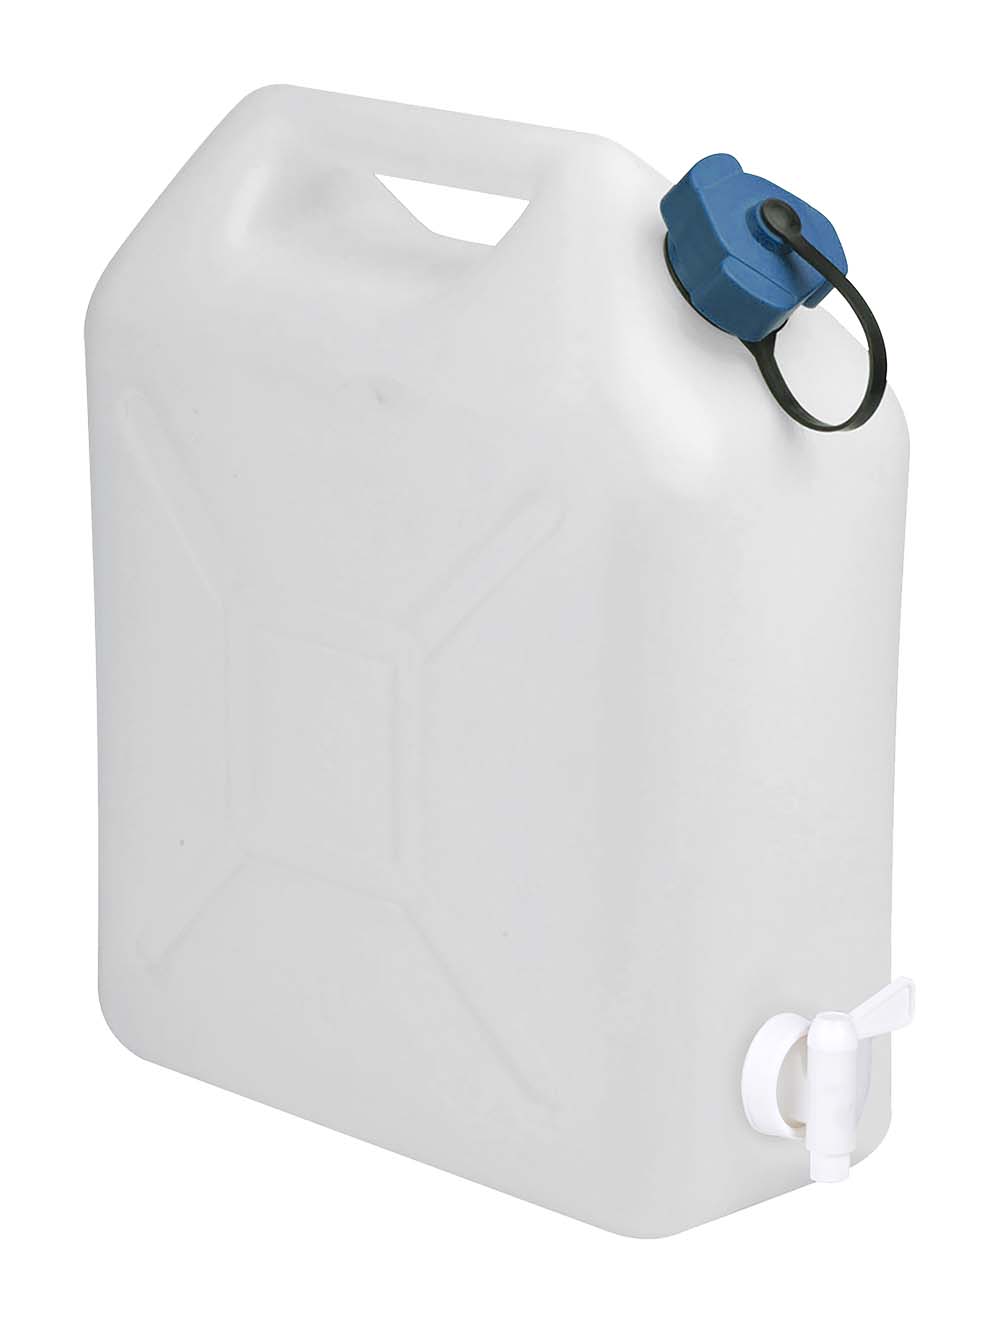 6603650 A jerrycan with a tap. With strong walls, a breather cap and a movable tap for pouring.